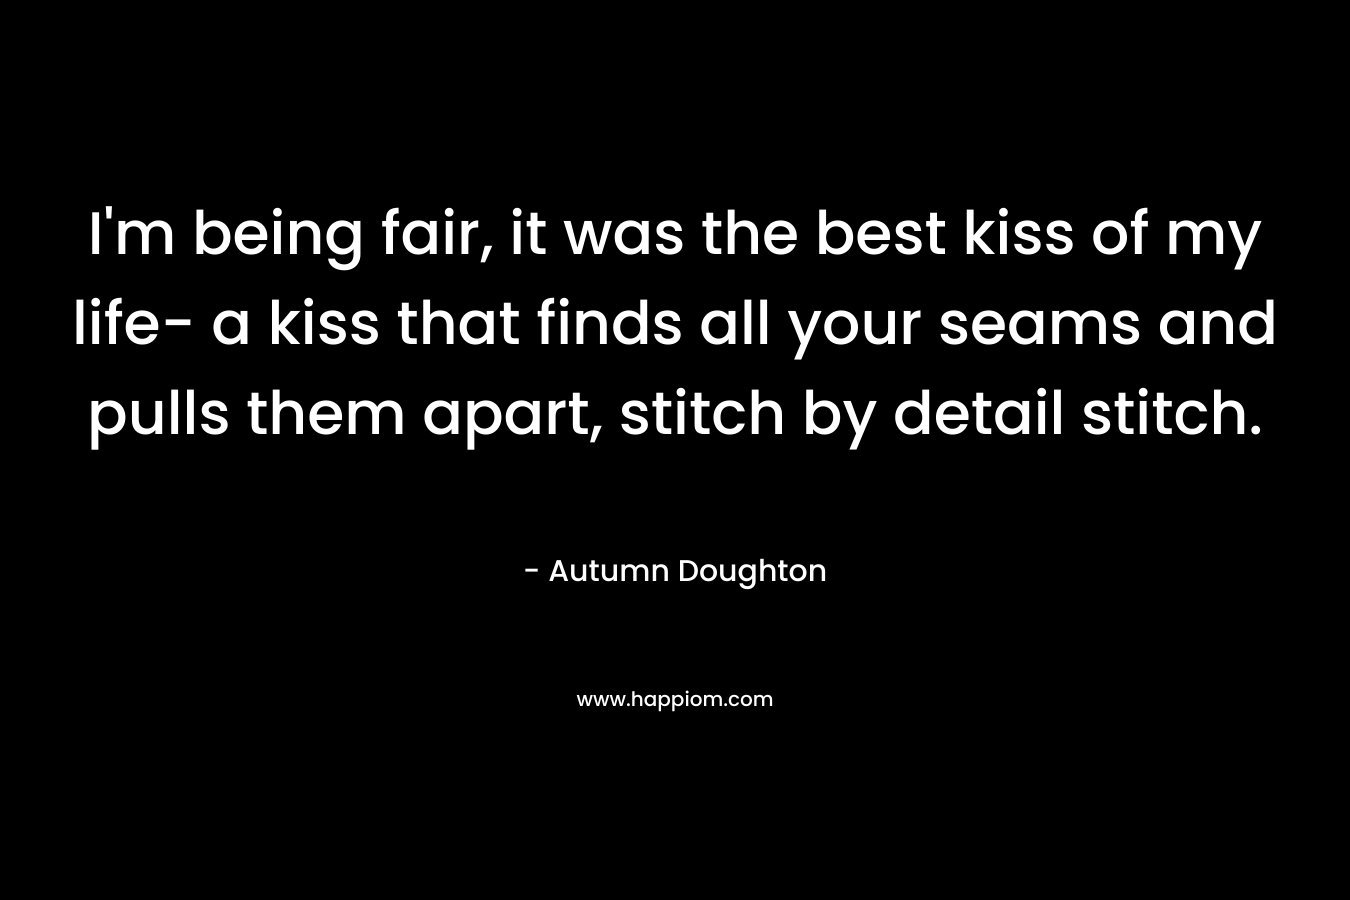 I'm being fair, it was the best kiss of my life- a kiss that finds all your seams and pulls them apart, stitch by detail stitch.